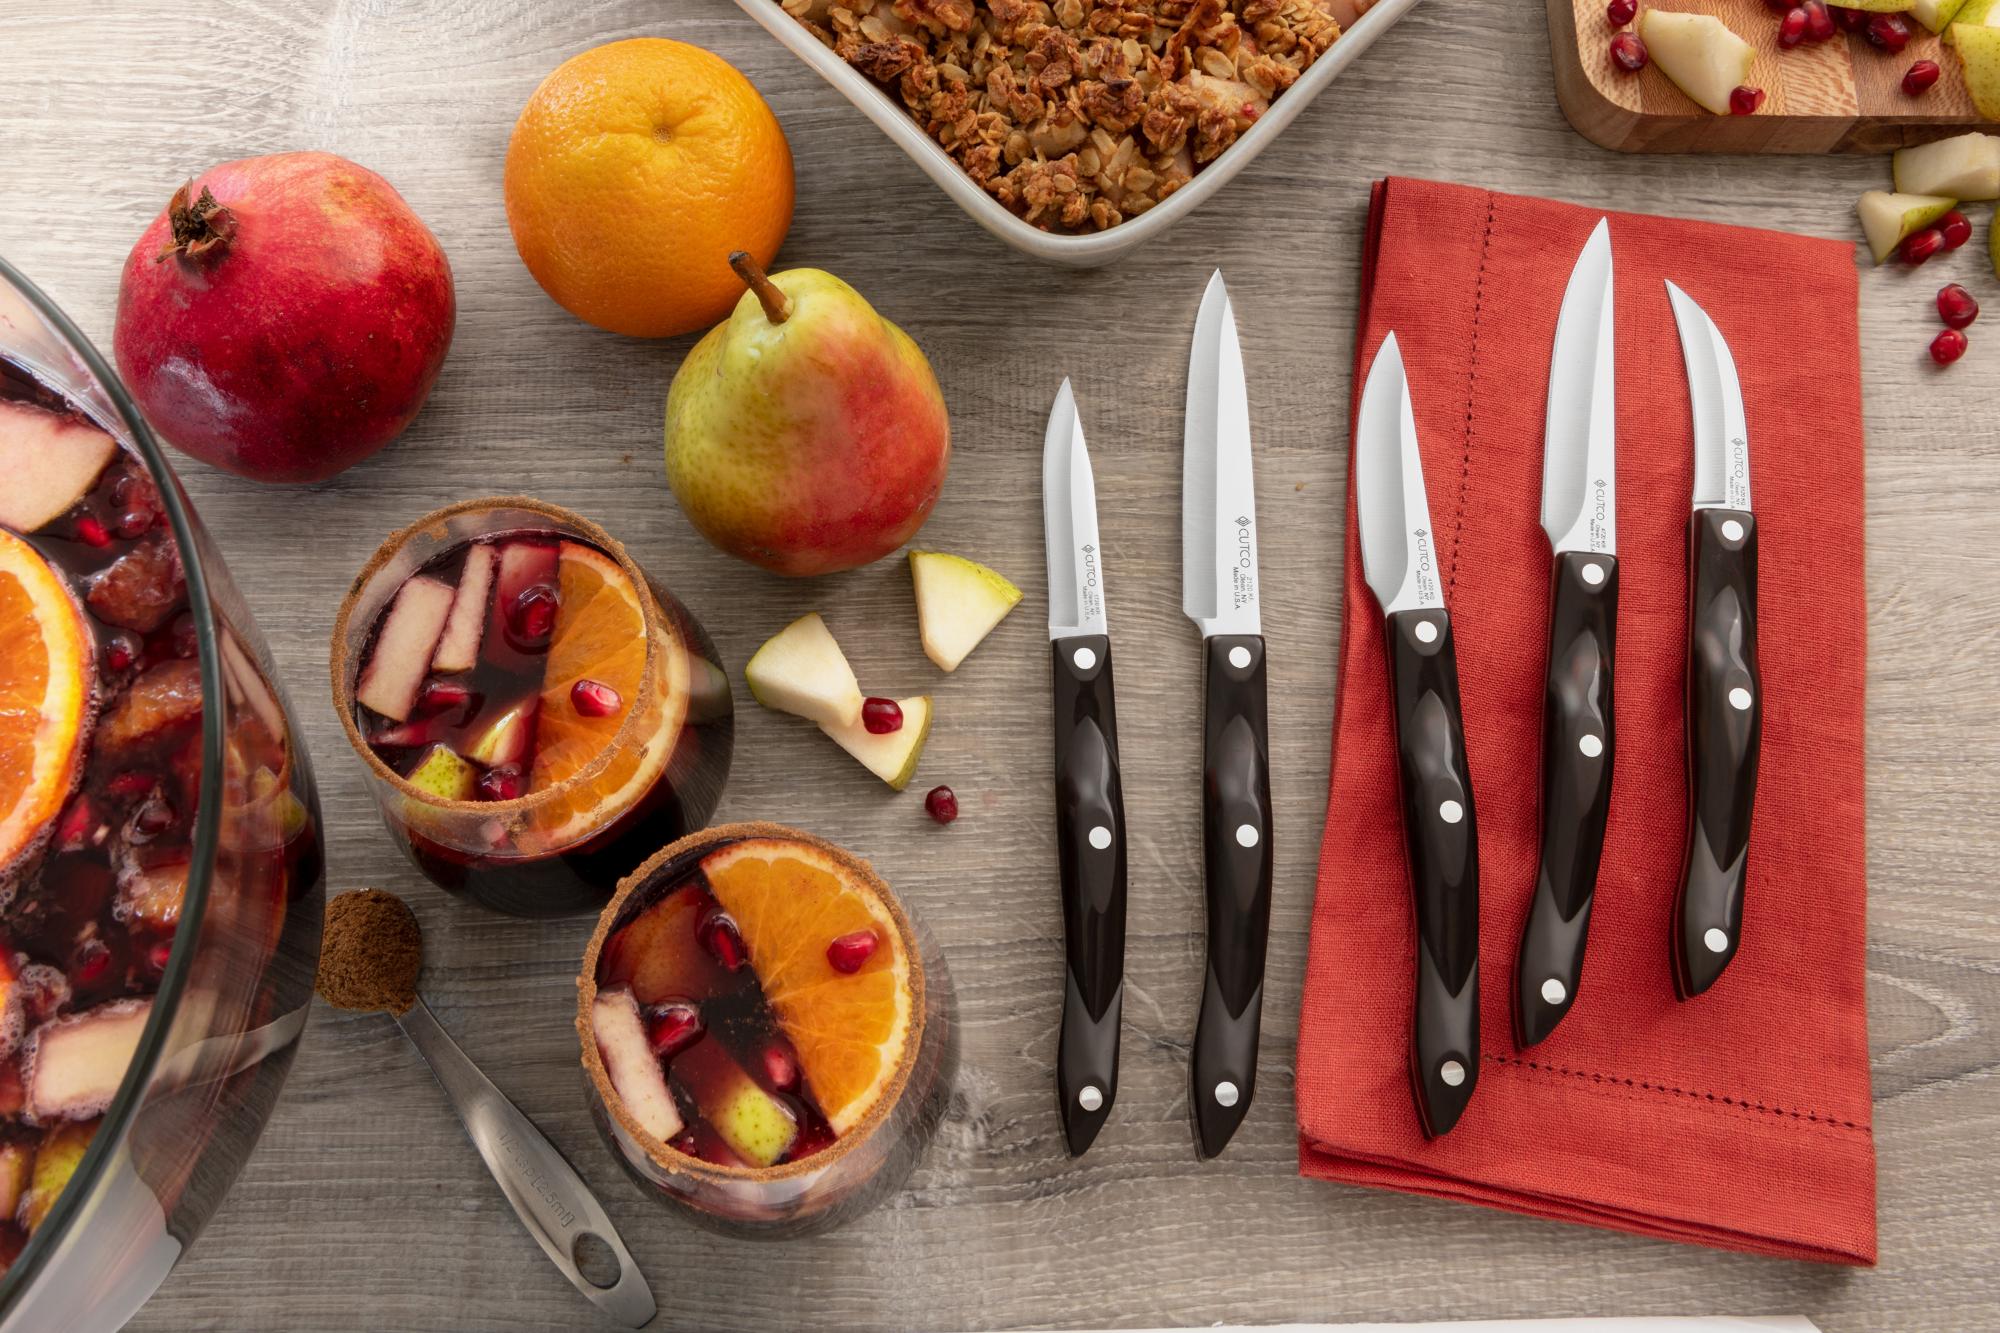 Paring knives with fruit.